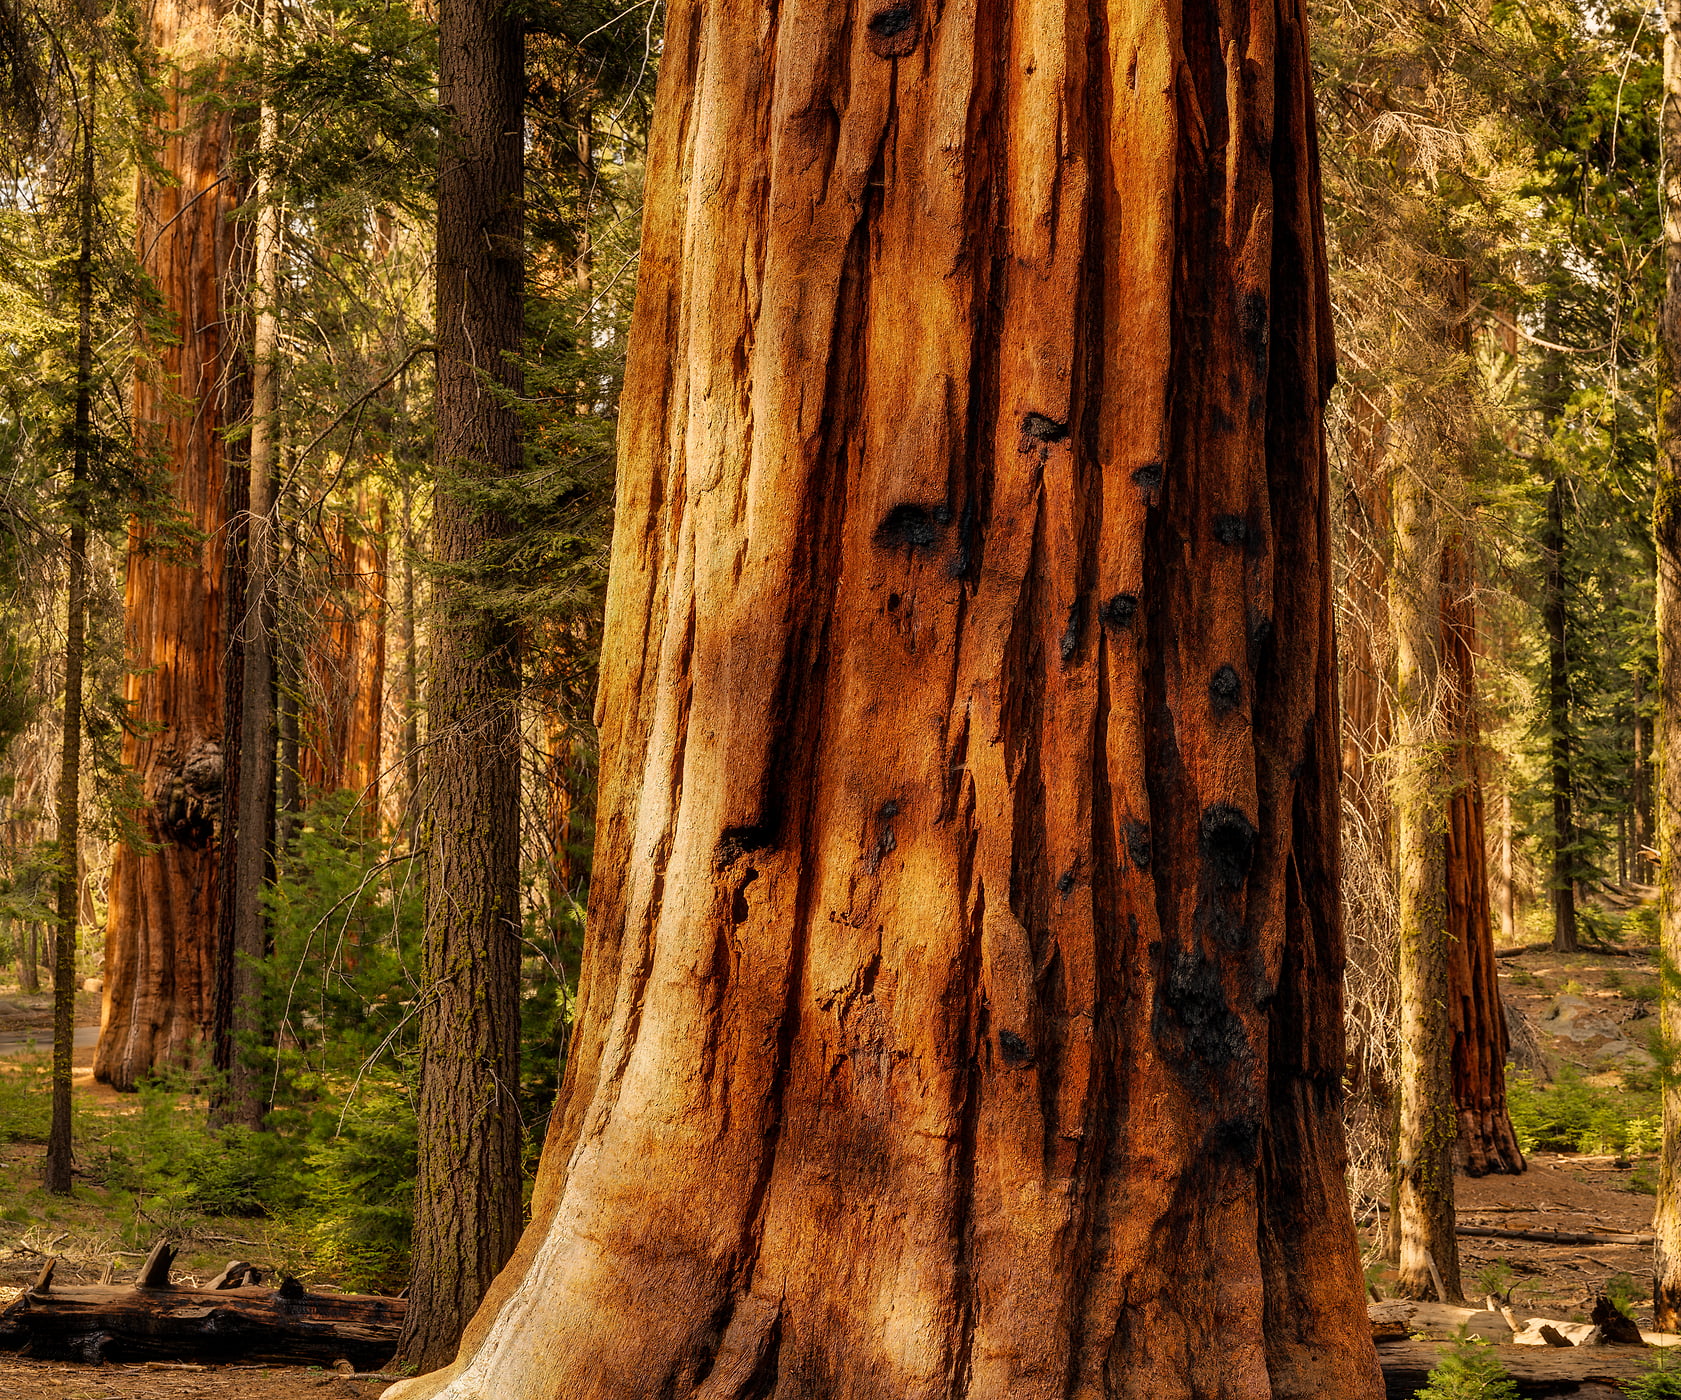 207 megapixels! A very high resolution, large-format VAST photo print of a giant sequoia tree in a forest; artistic photograph created by Chris Blake in The Giant Forest, Sequoia National Park.